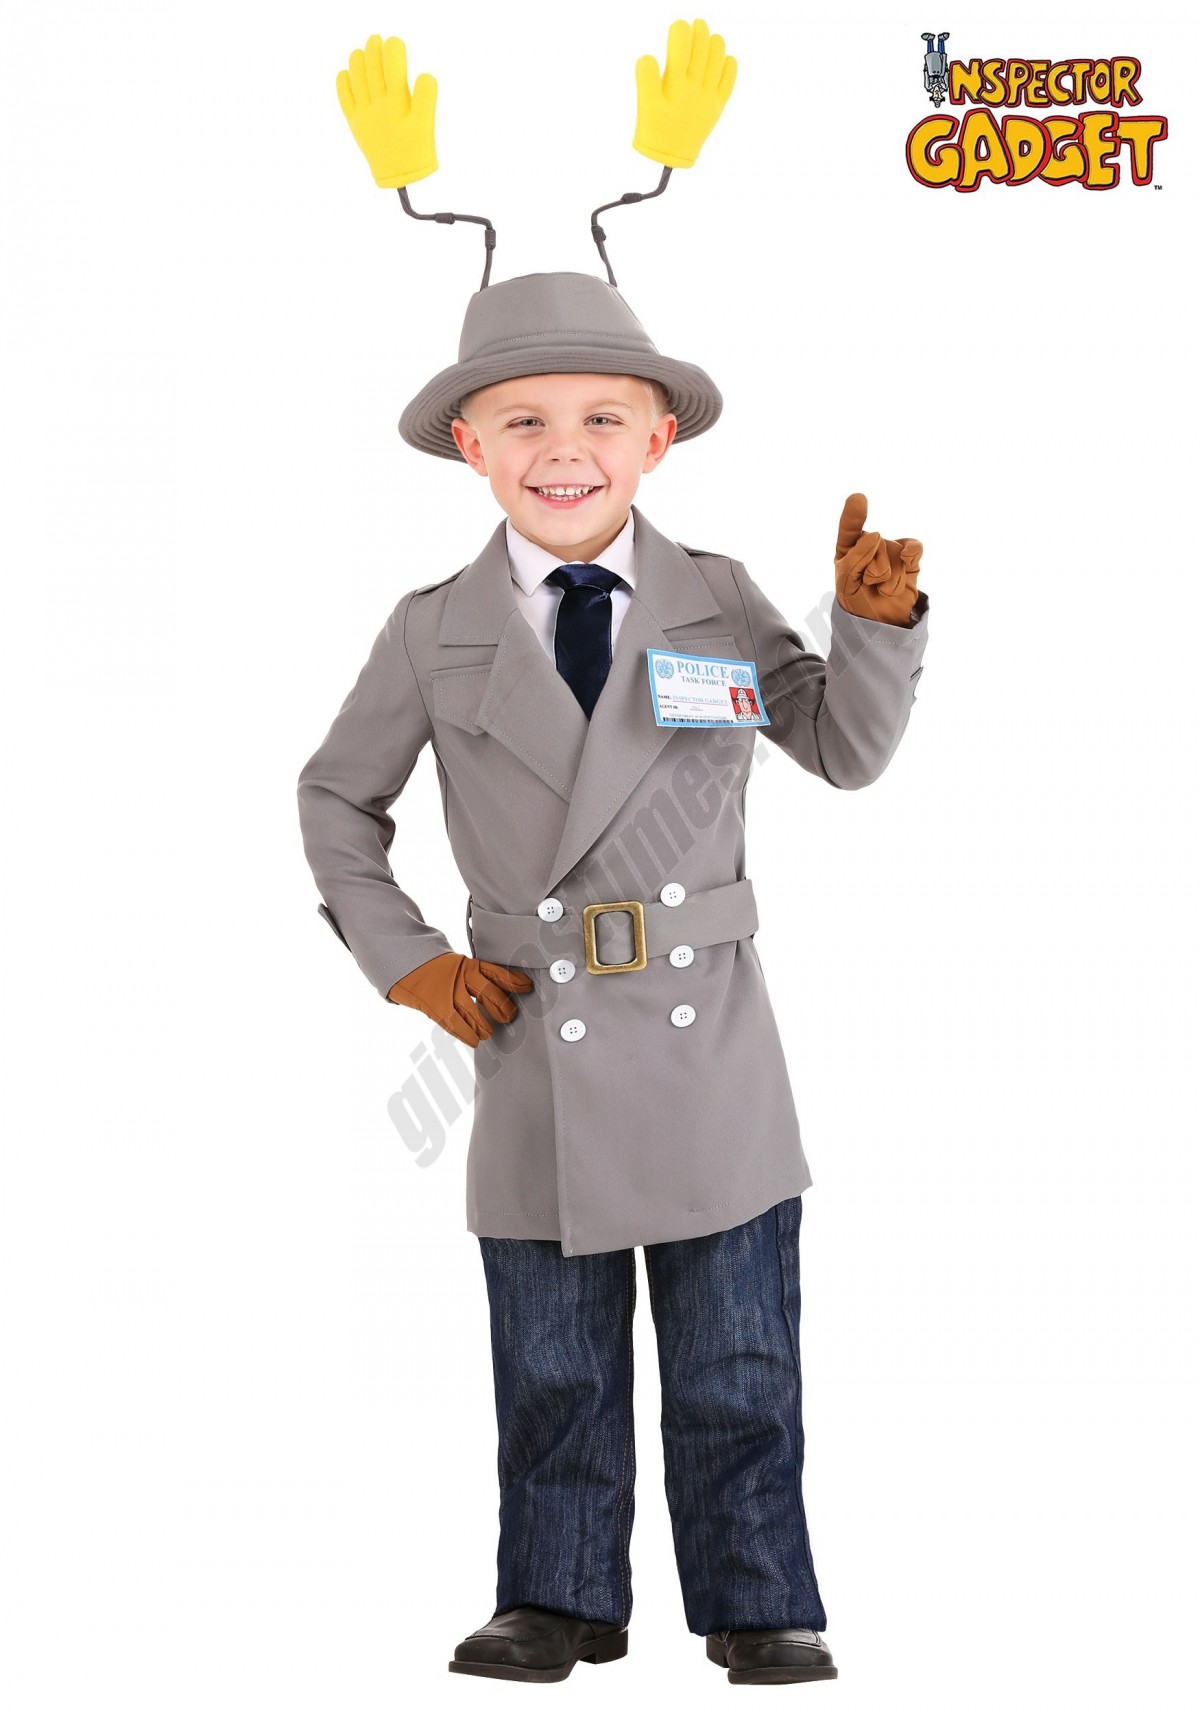 Inspector Gadget Costume for Toddlers Promotions - -0